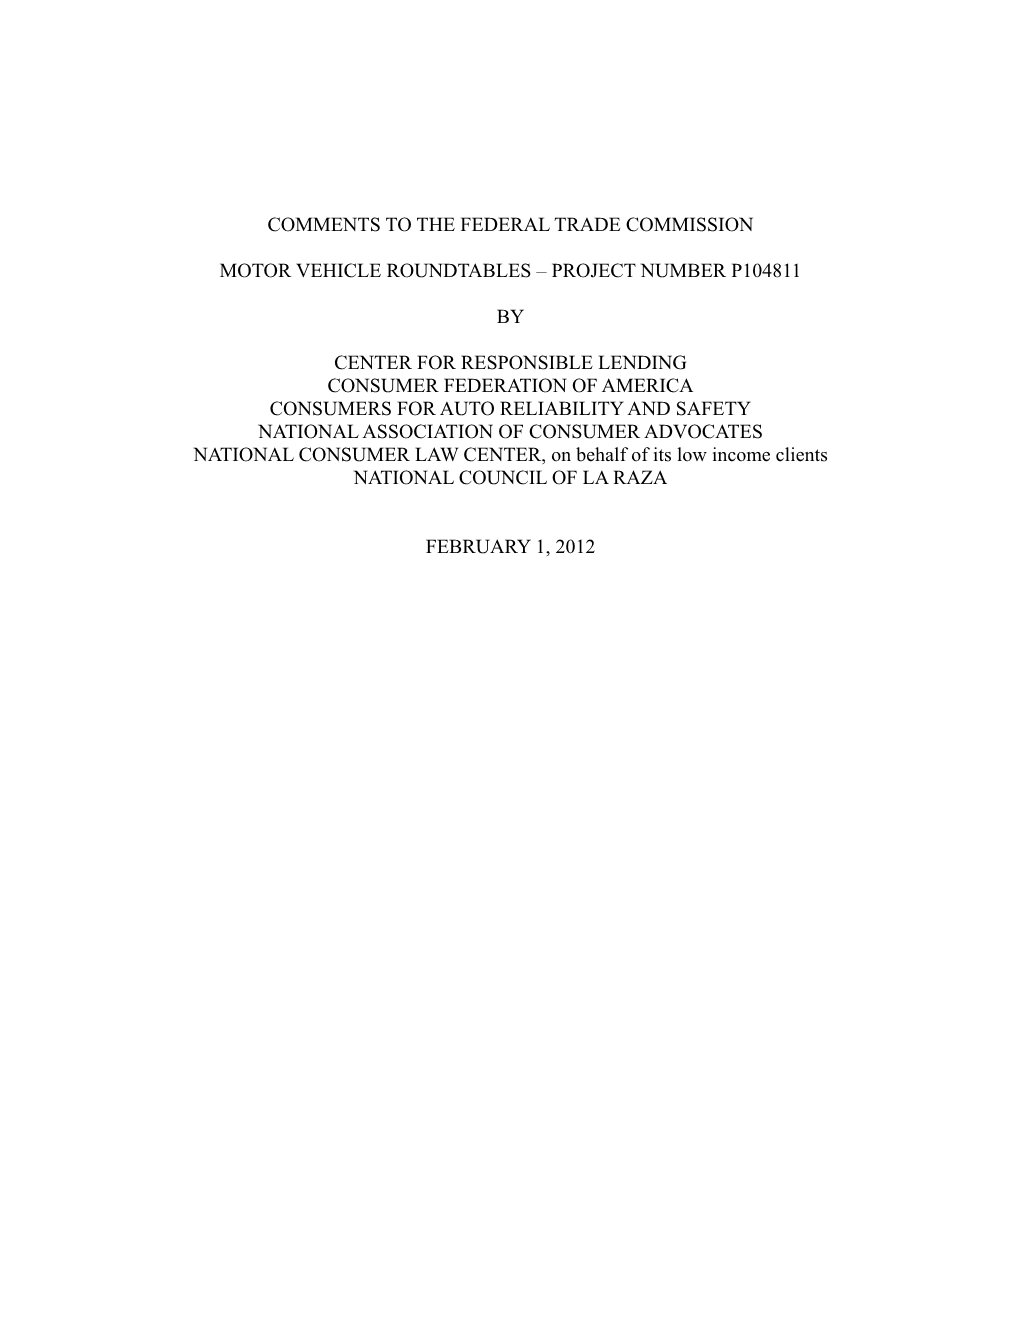 Comments to the Federal Trade Commission Motor Vehicle Roundtables – Project Number P104811 by Center for Responsible Lending